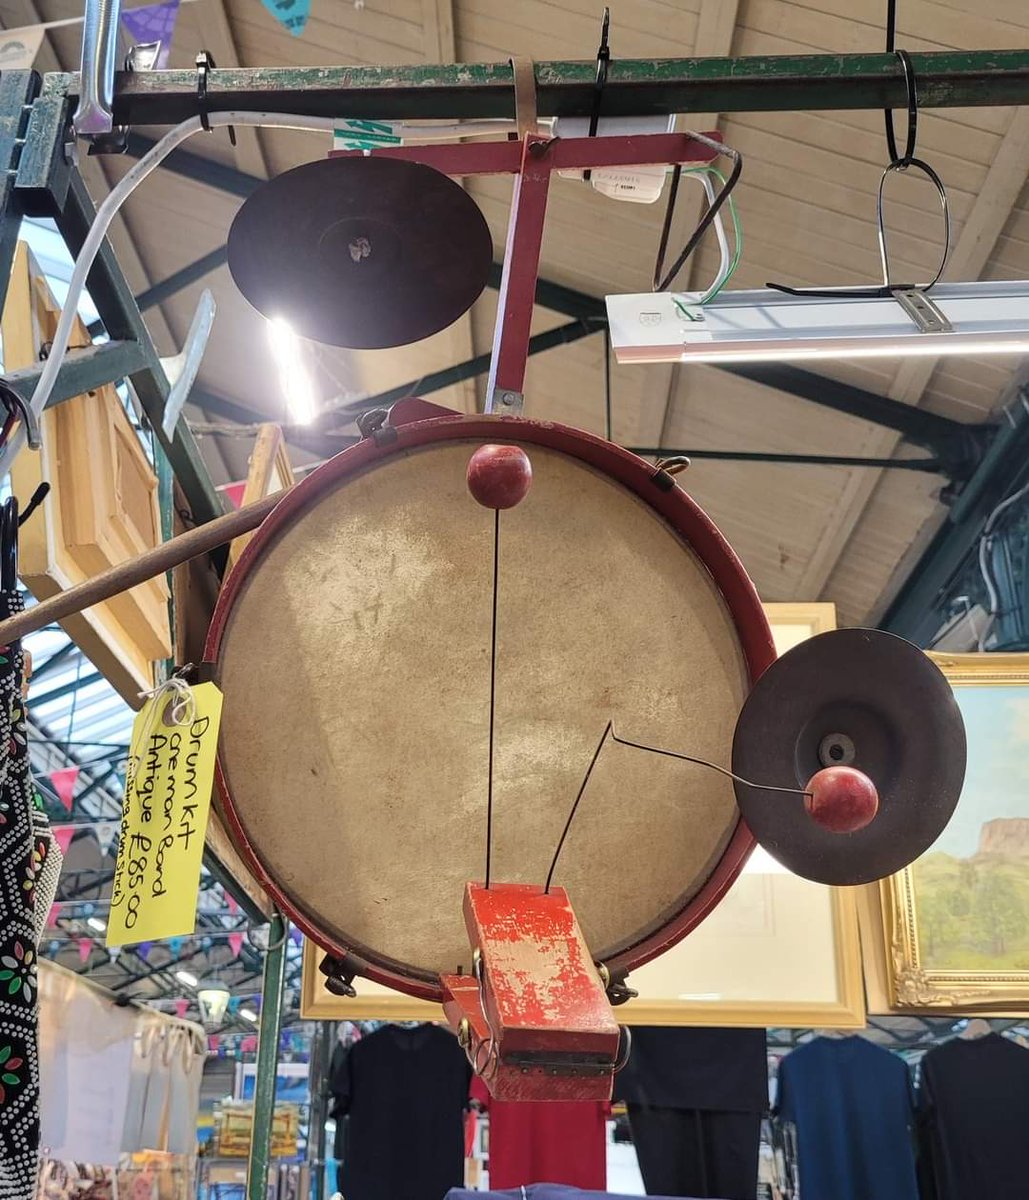 Bring a little music into your life with Collectable Curios very own antique One Man Band... just the thing for a party!

info@collectablecurios.co.uk

#OneManBand #DrumKit #Music #Collector #Antiquing #ShopVintage #Home #ShopLocal #SupportLocal #StGeorgesBelfast #StGeorgesMarket